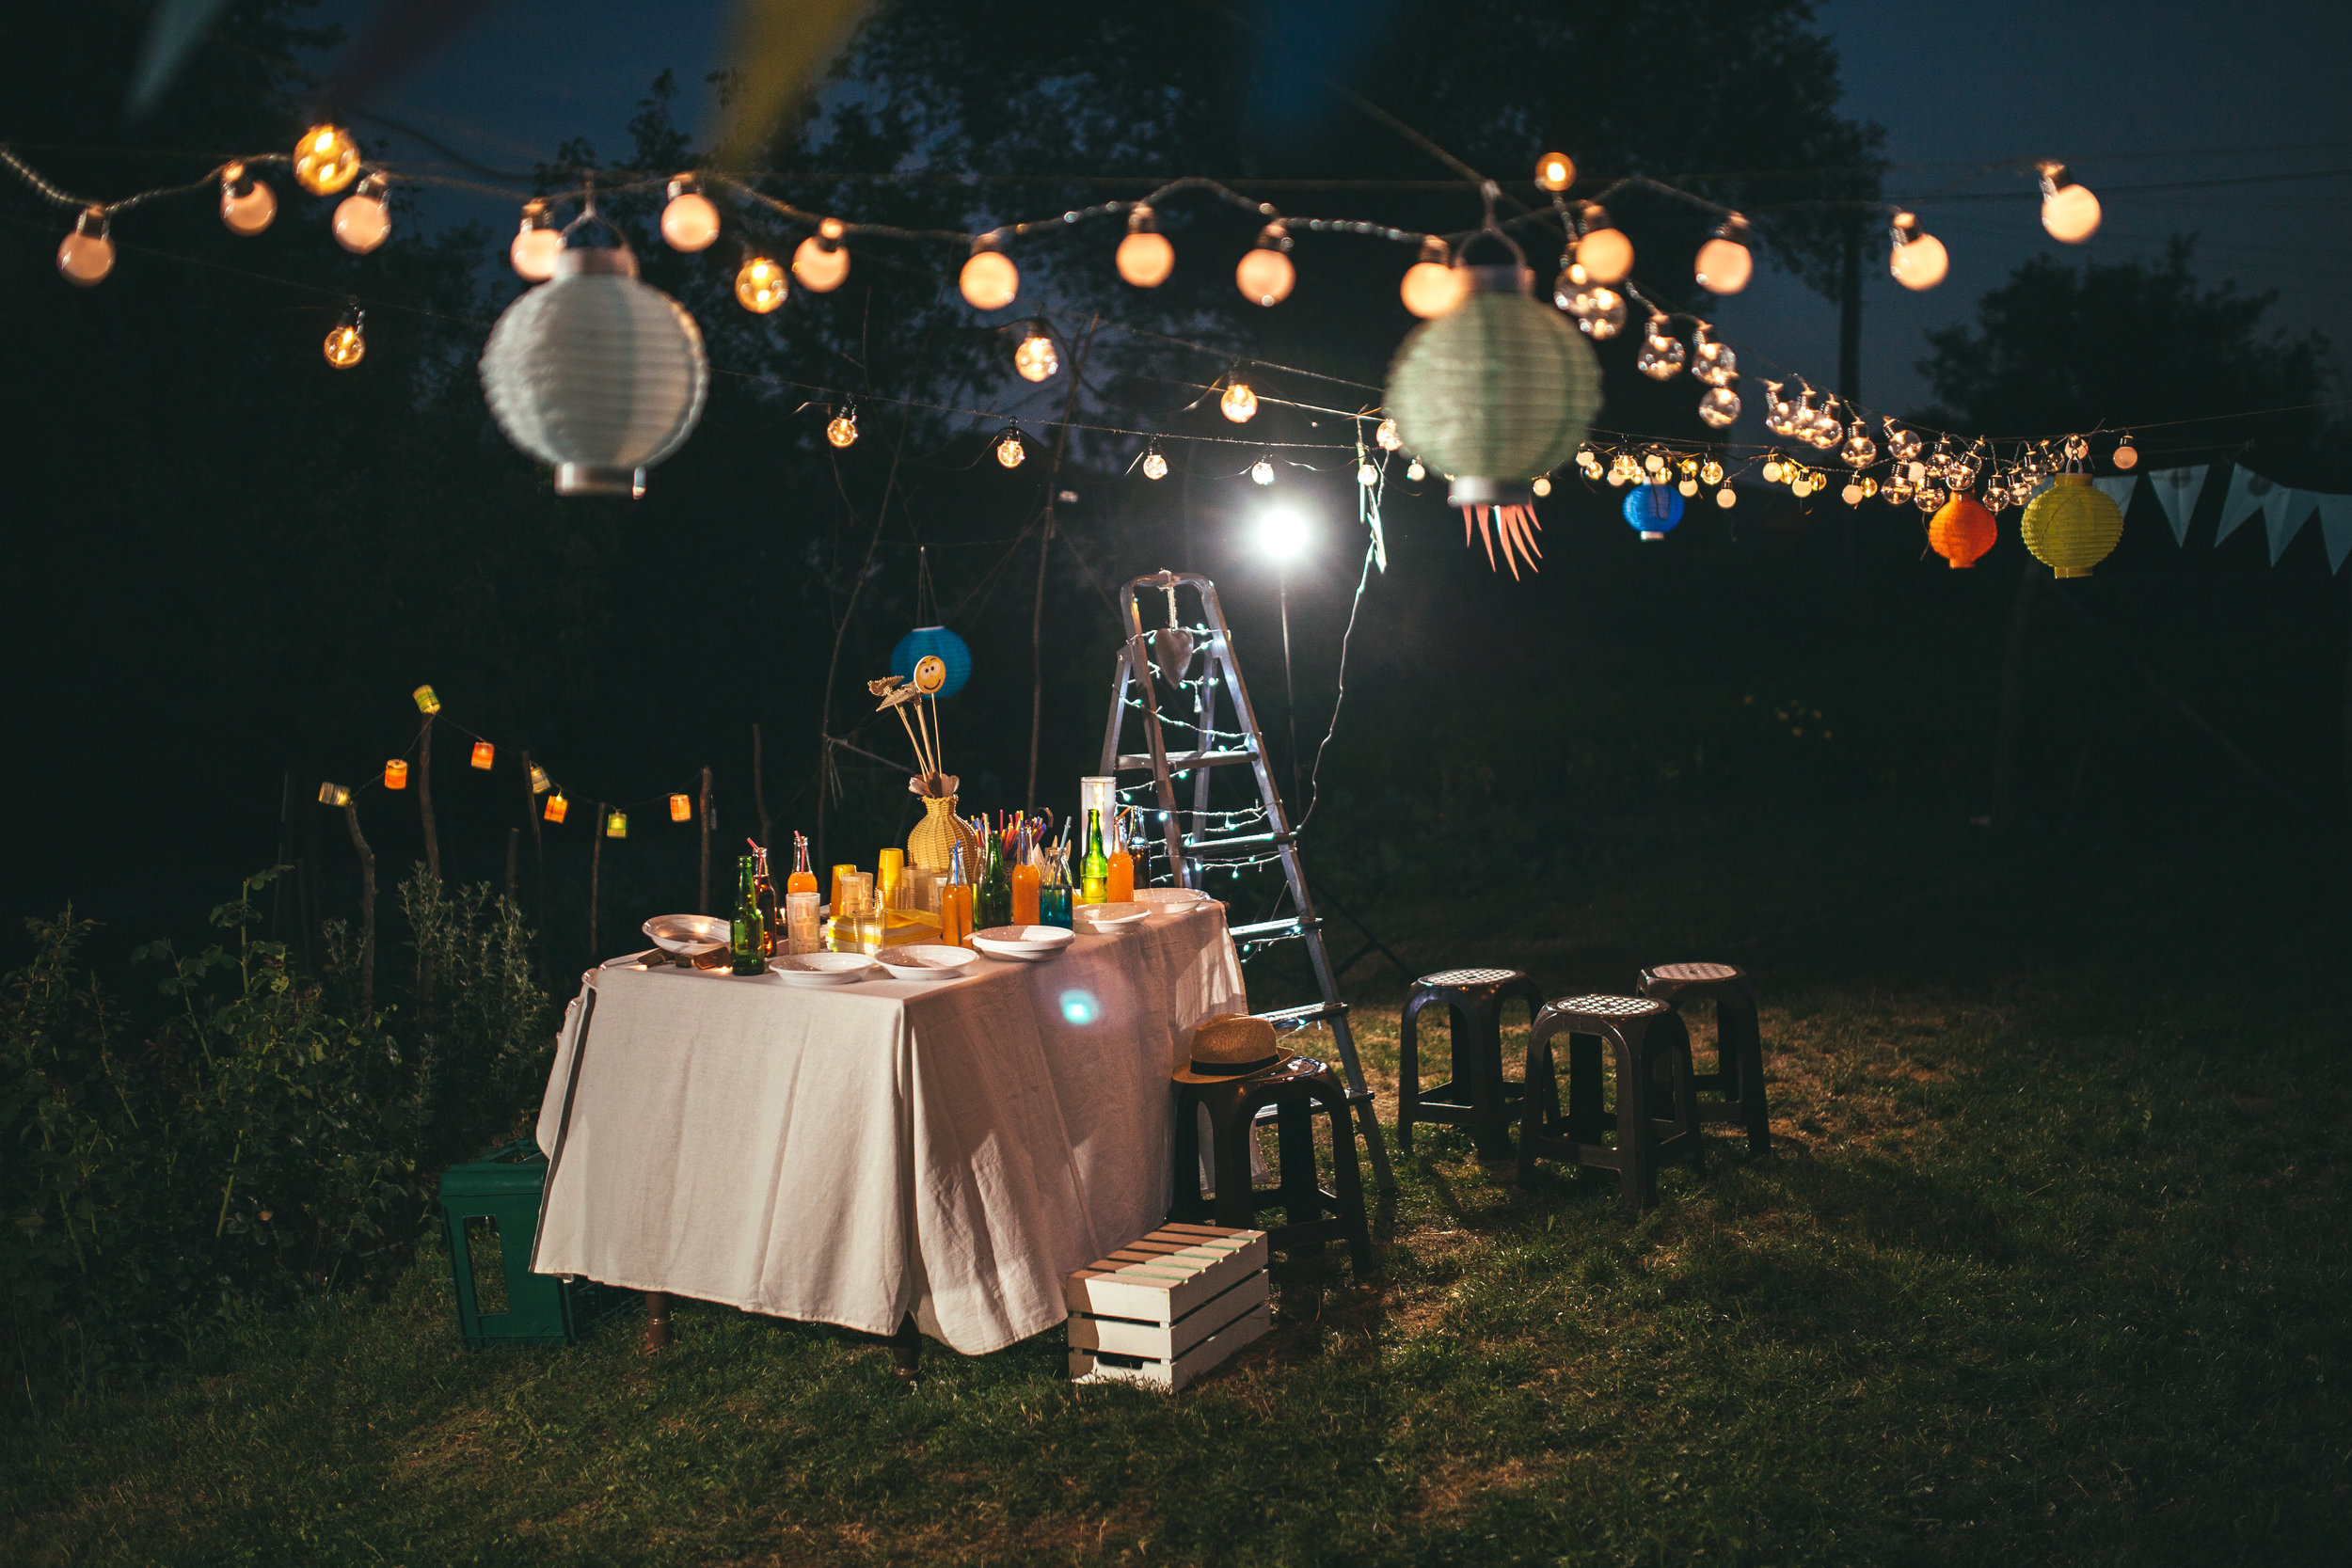 Creative Ways to Light Your Outdoor Space